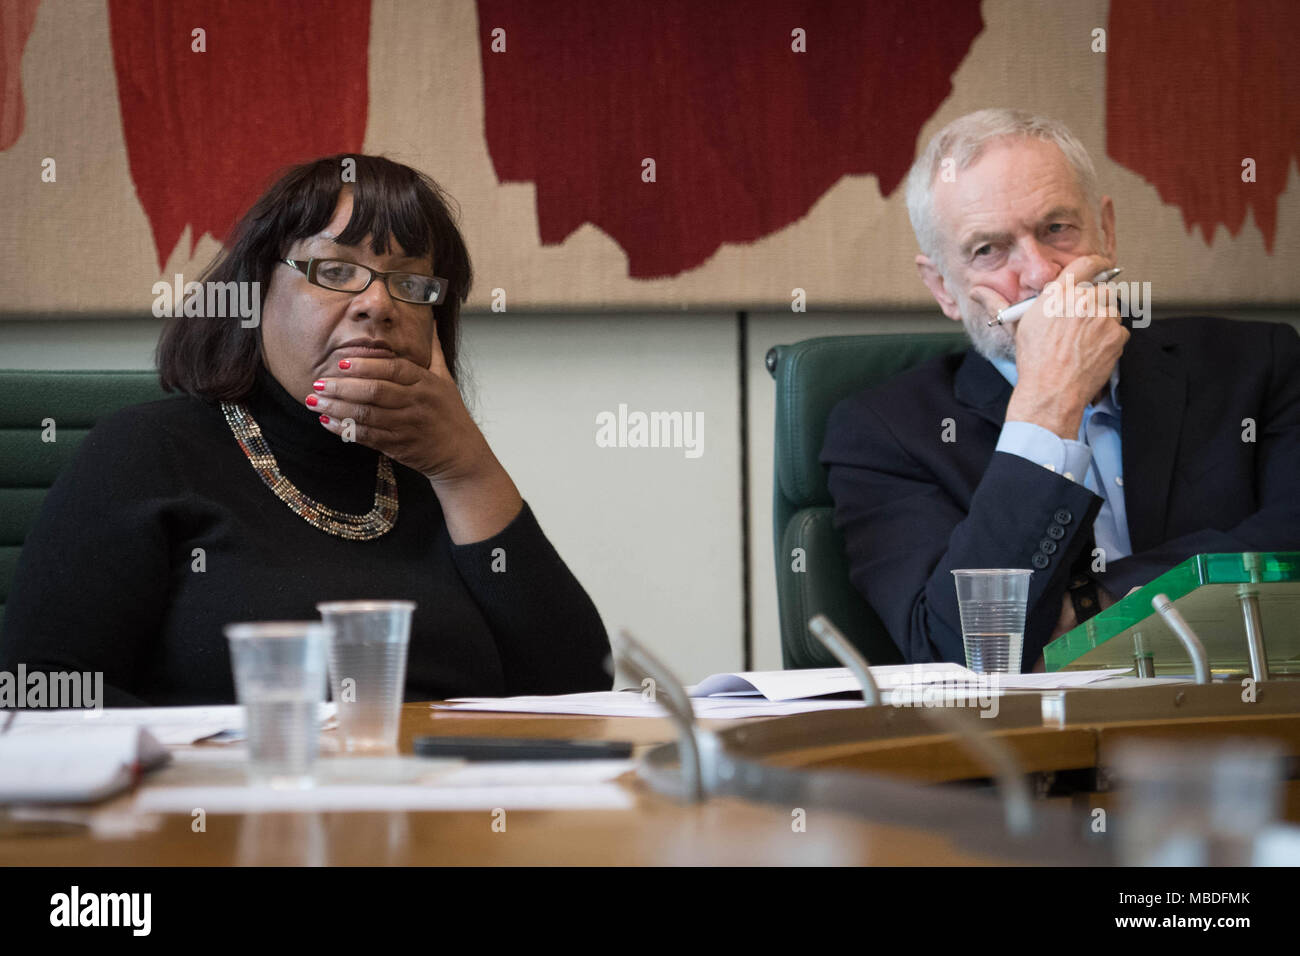 Labour leader Jeremy Corbyn hosts a gun and knife crime round table meeting in Portcullis House, London, with police officers and experts from organisations tackling gun and knife crime in Scotland. Stock Photo